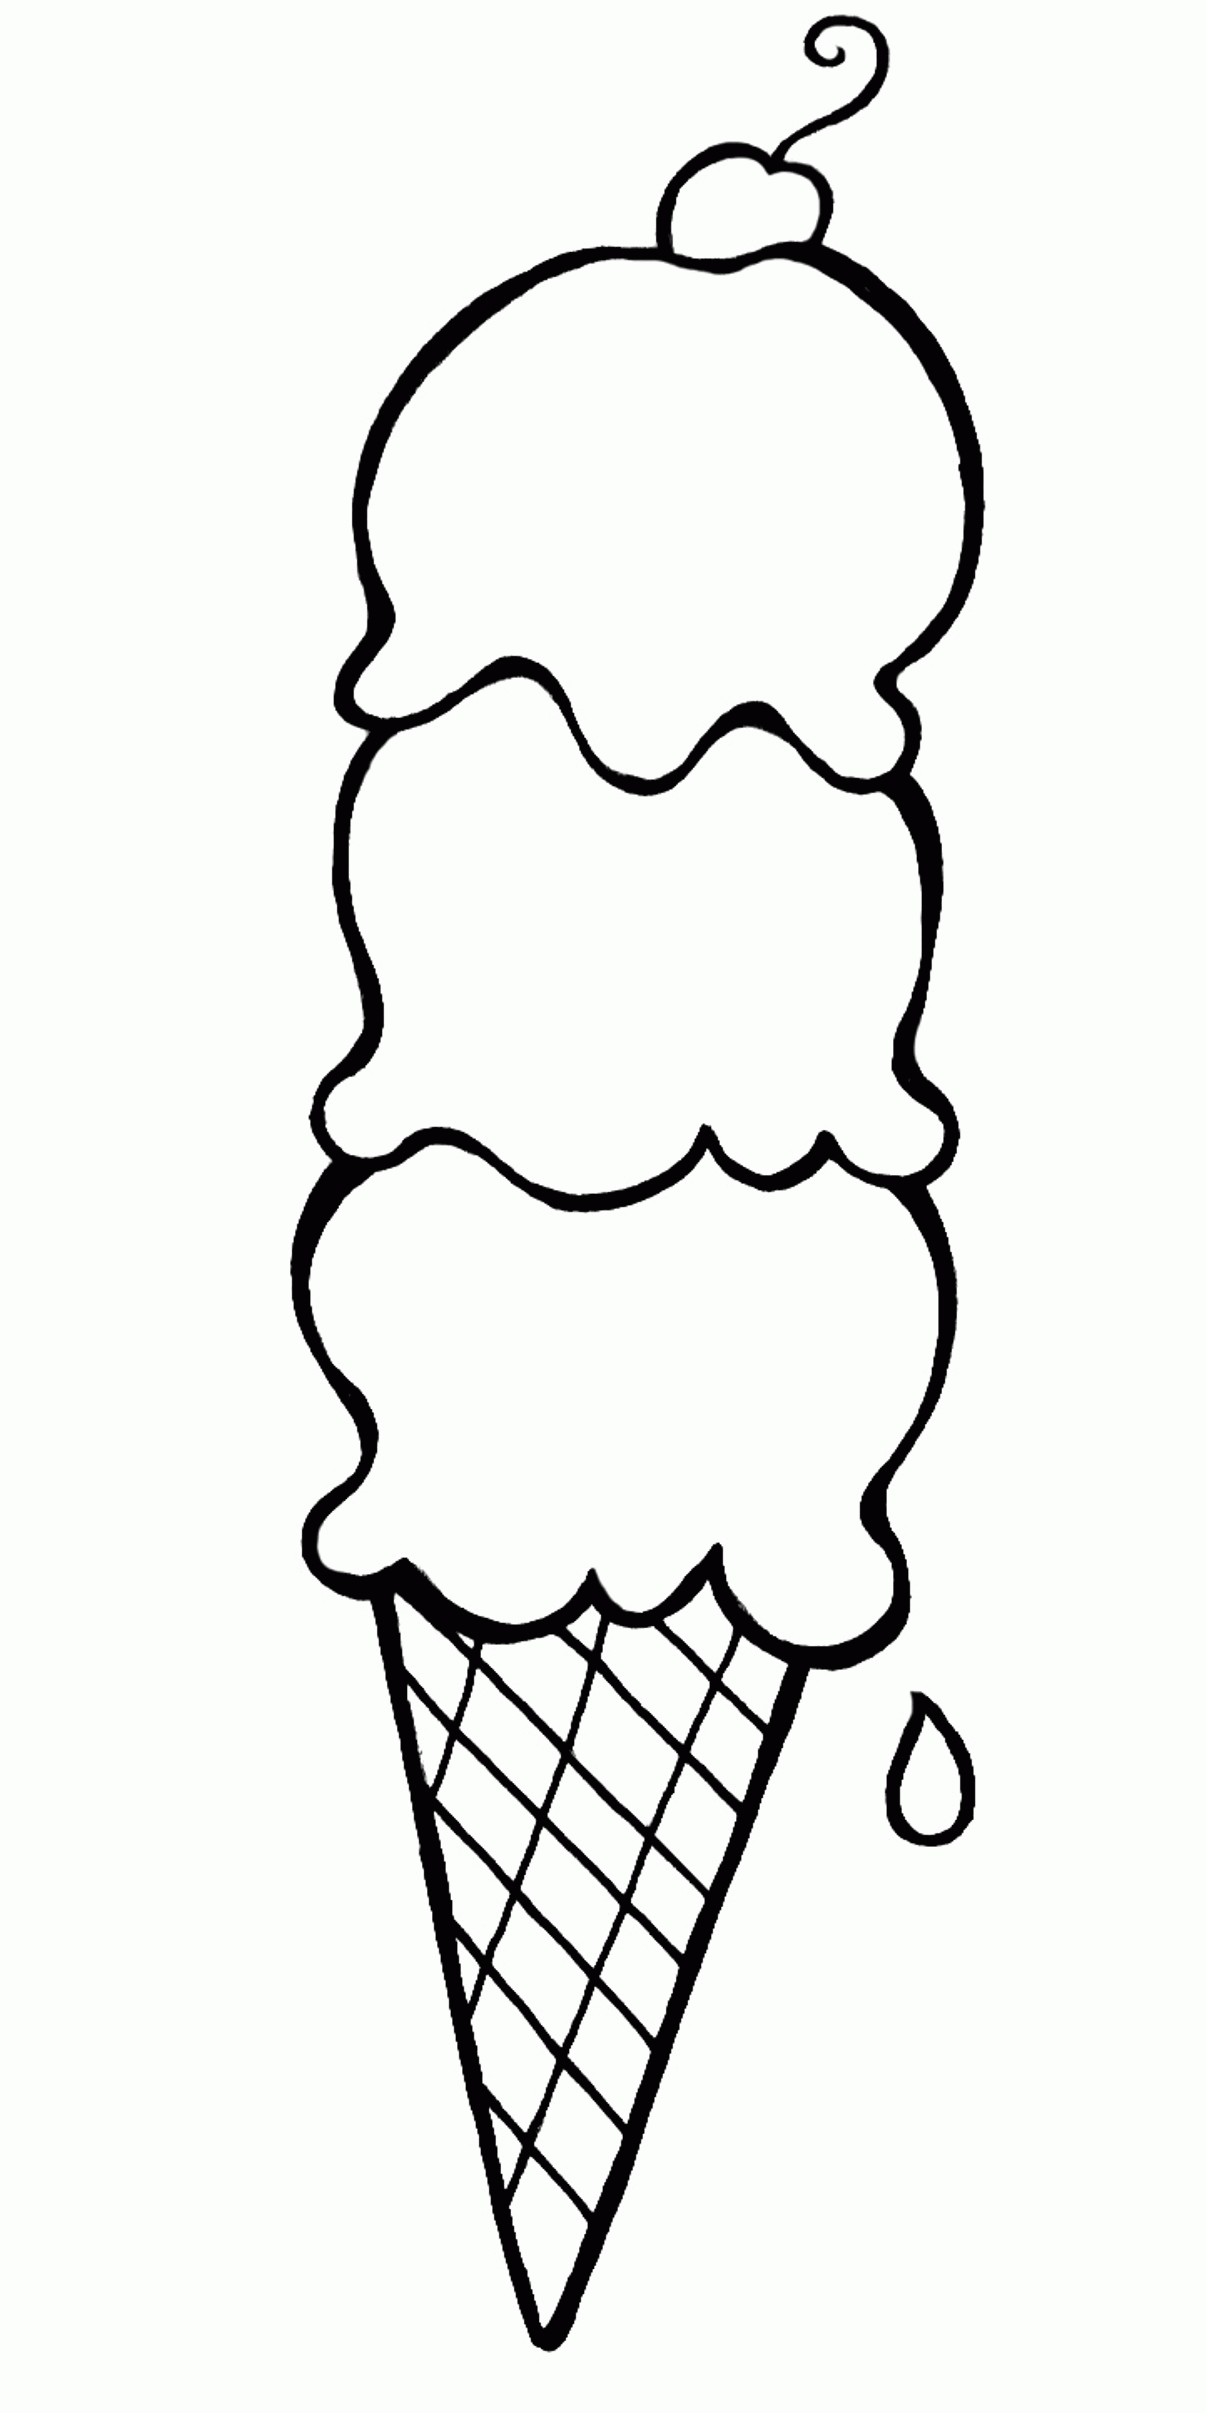 Boy Eating Ice Cream Coloring Page - Coloring Pages For All Ages